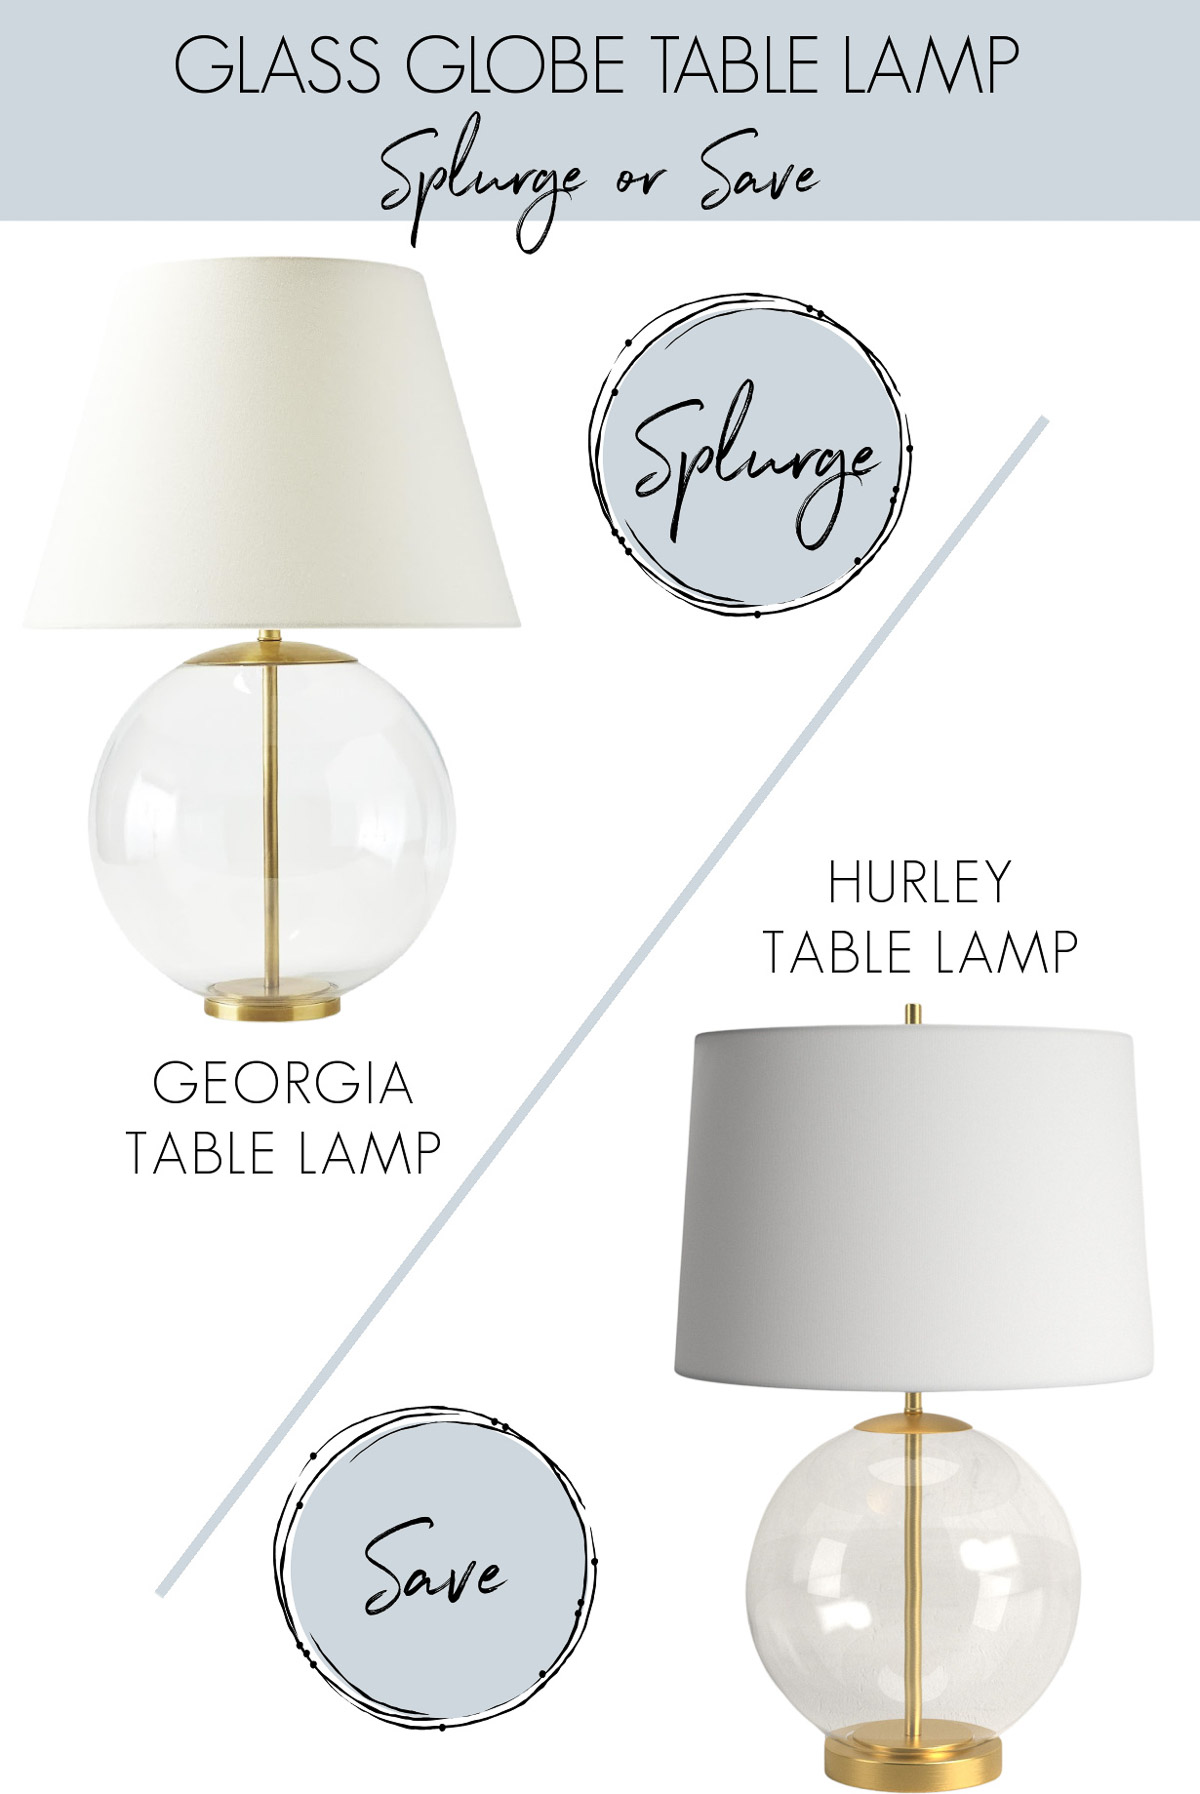 A designer version and look for less version of a glass globe table lamp